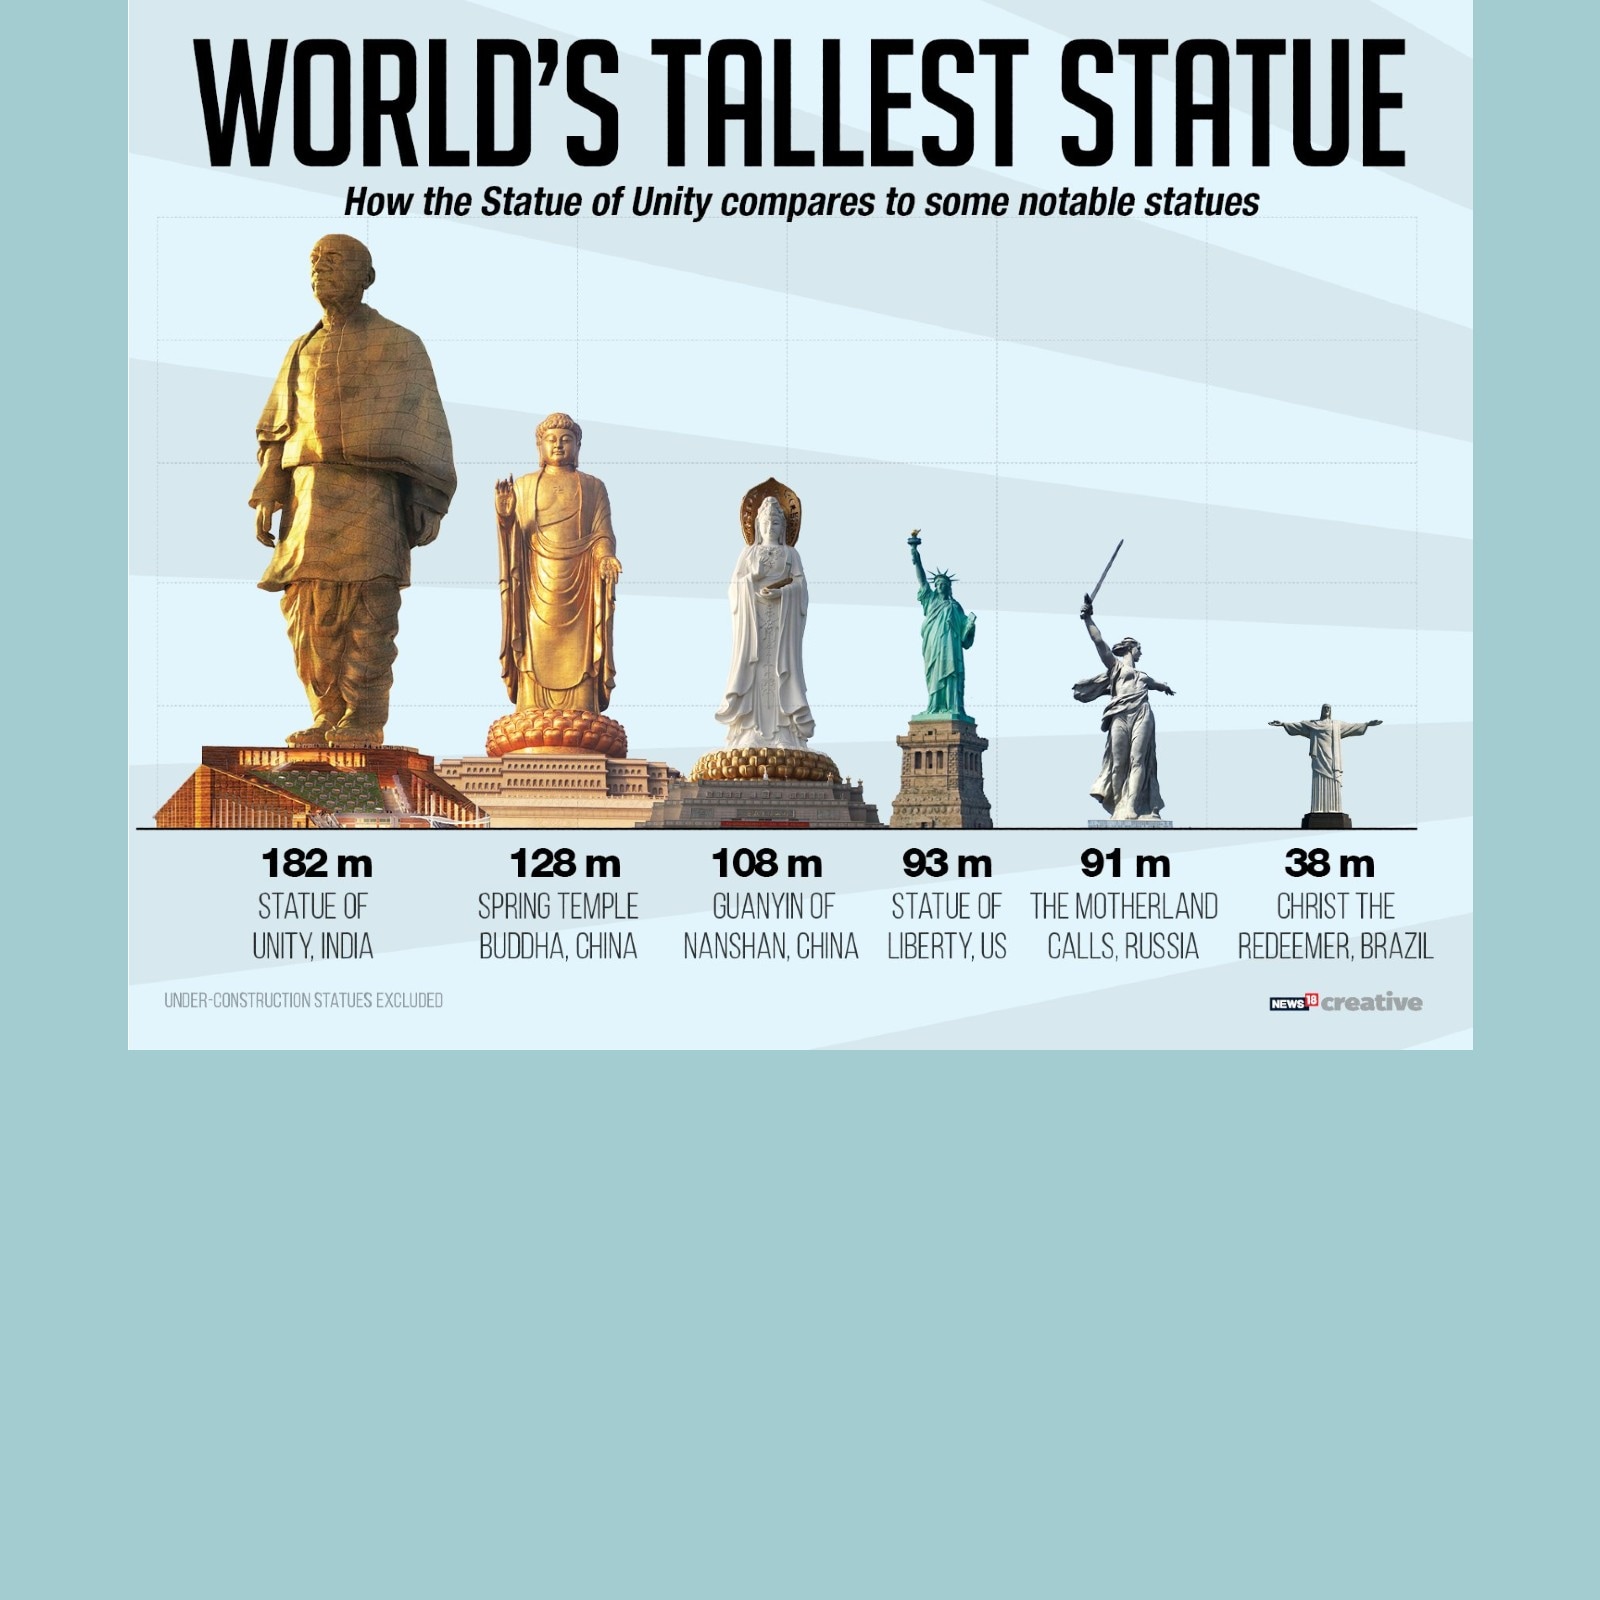 IN PICS: Statue of Unity, The World's Tallest Statue of Sardar